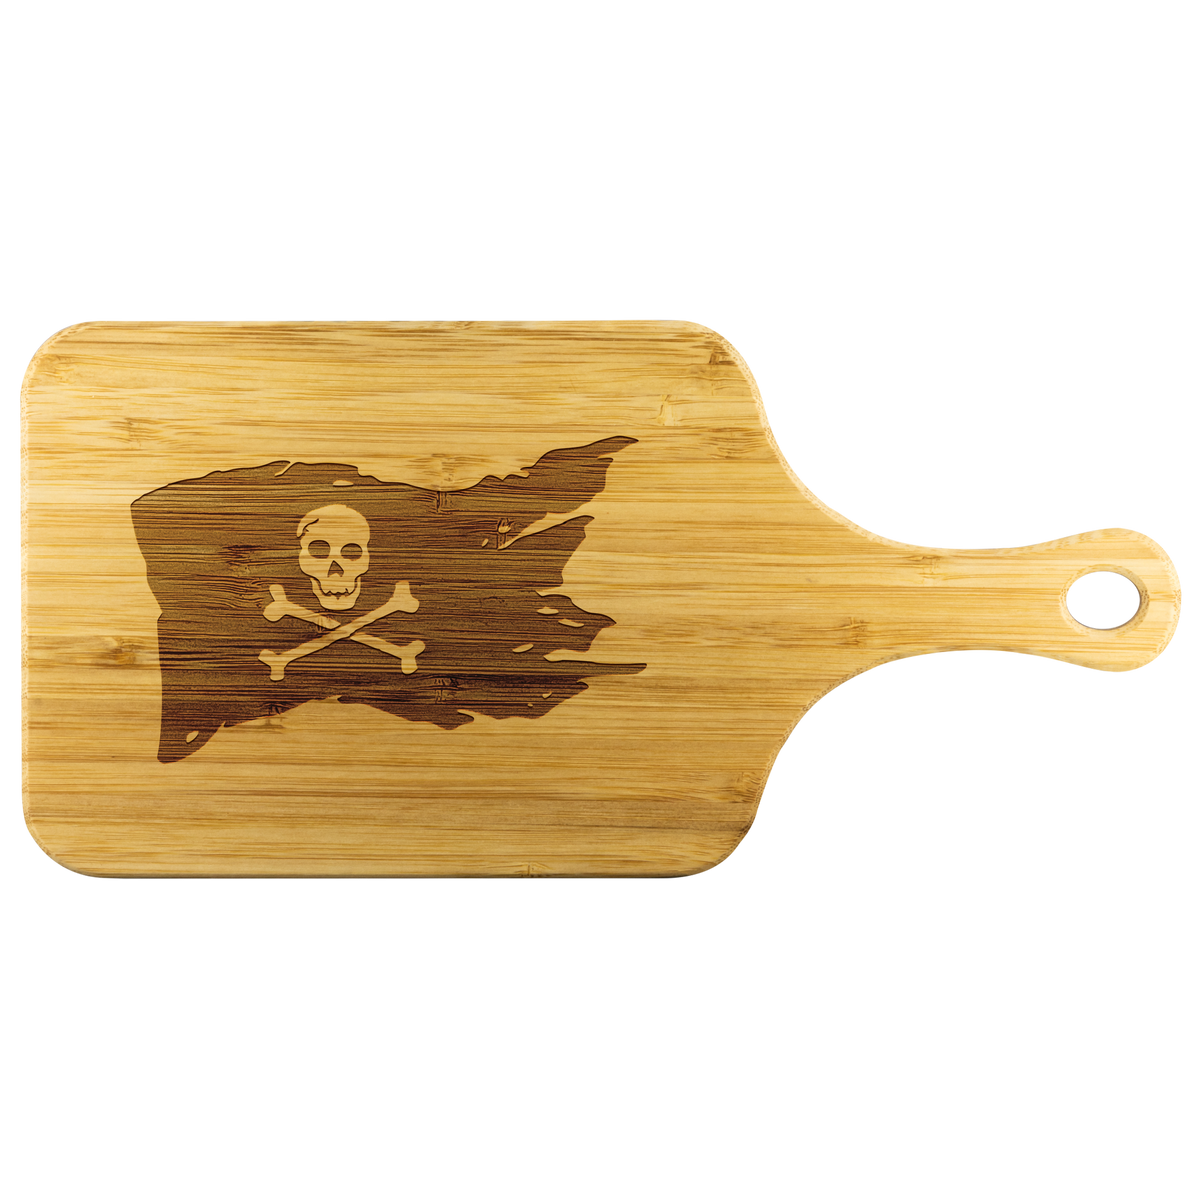 Pirates flag with skull and cross bones - Wood Cutting Board With Handle